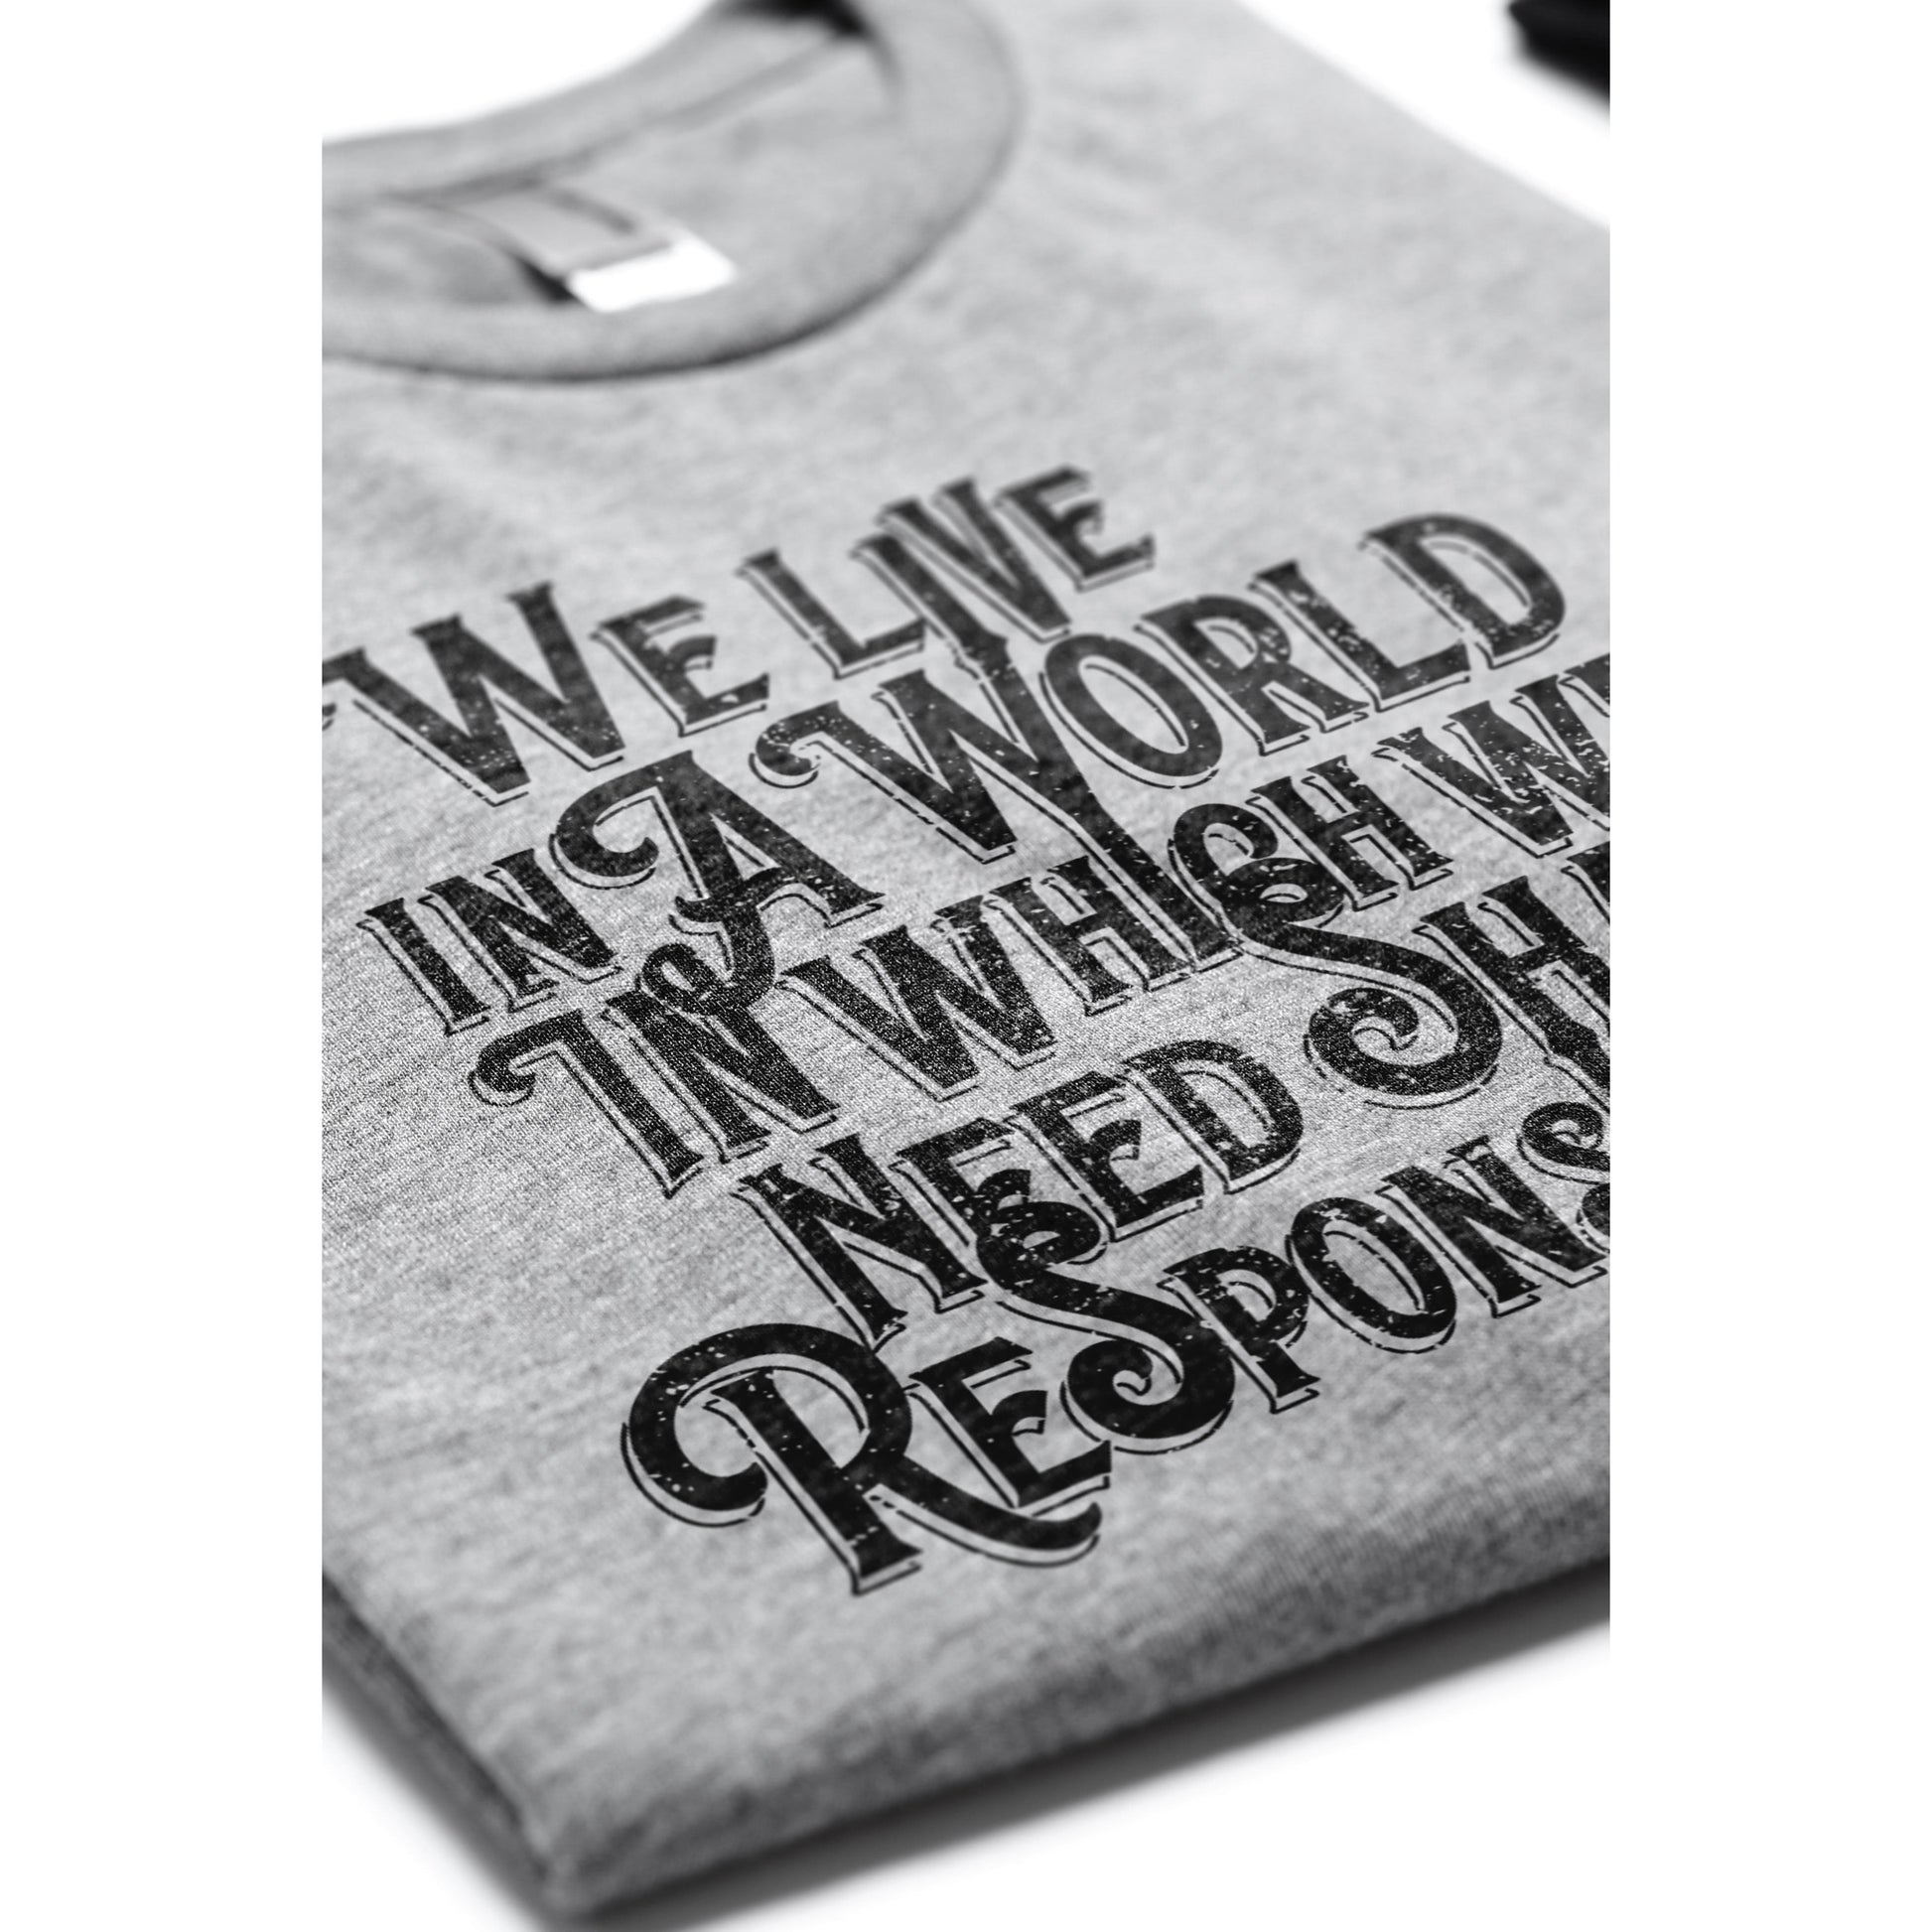 We Live In A World In Which We Need Share Responsibility - threadtank | stories you can wear